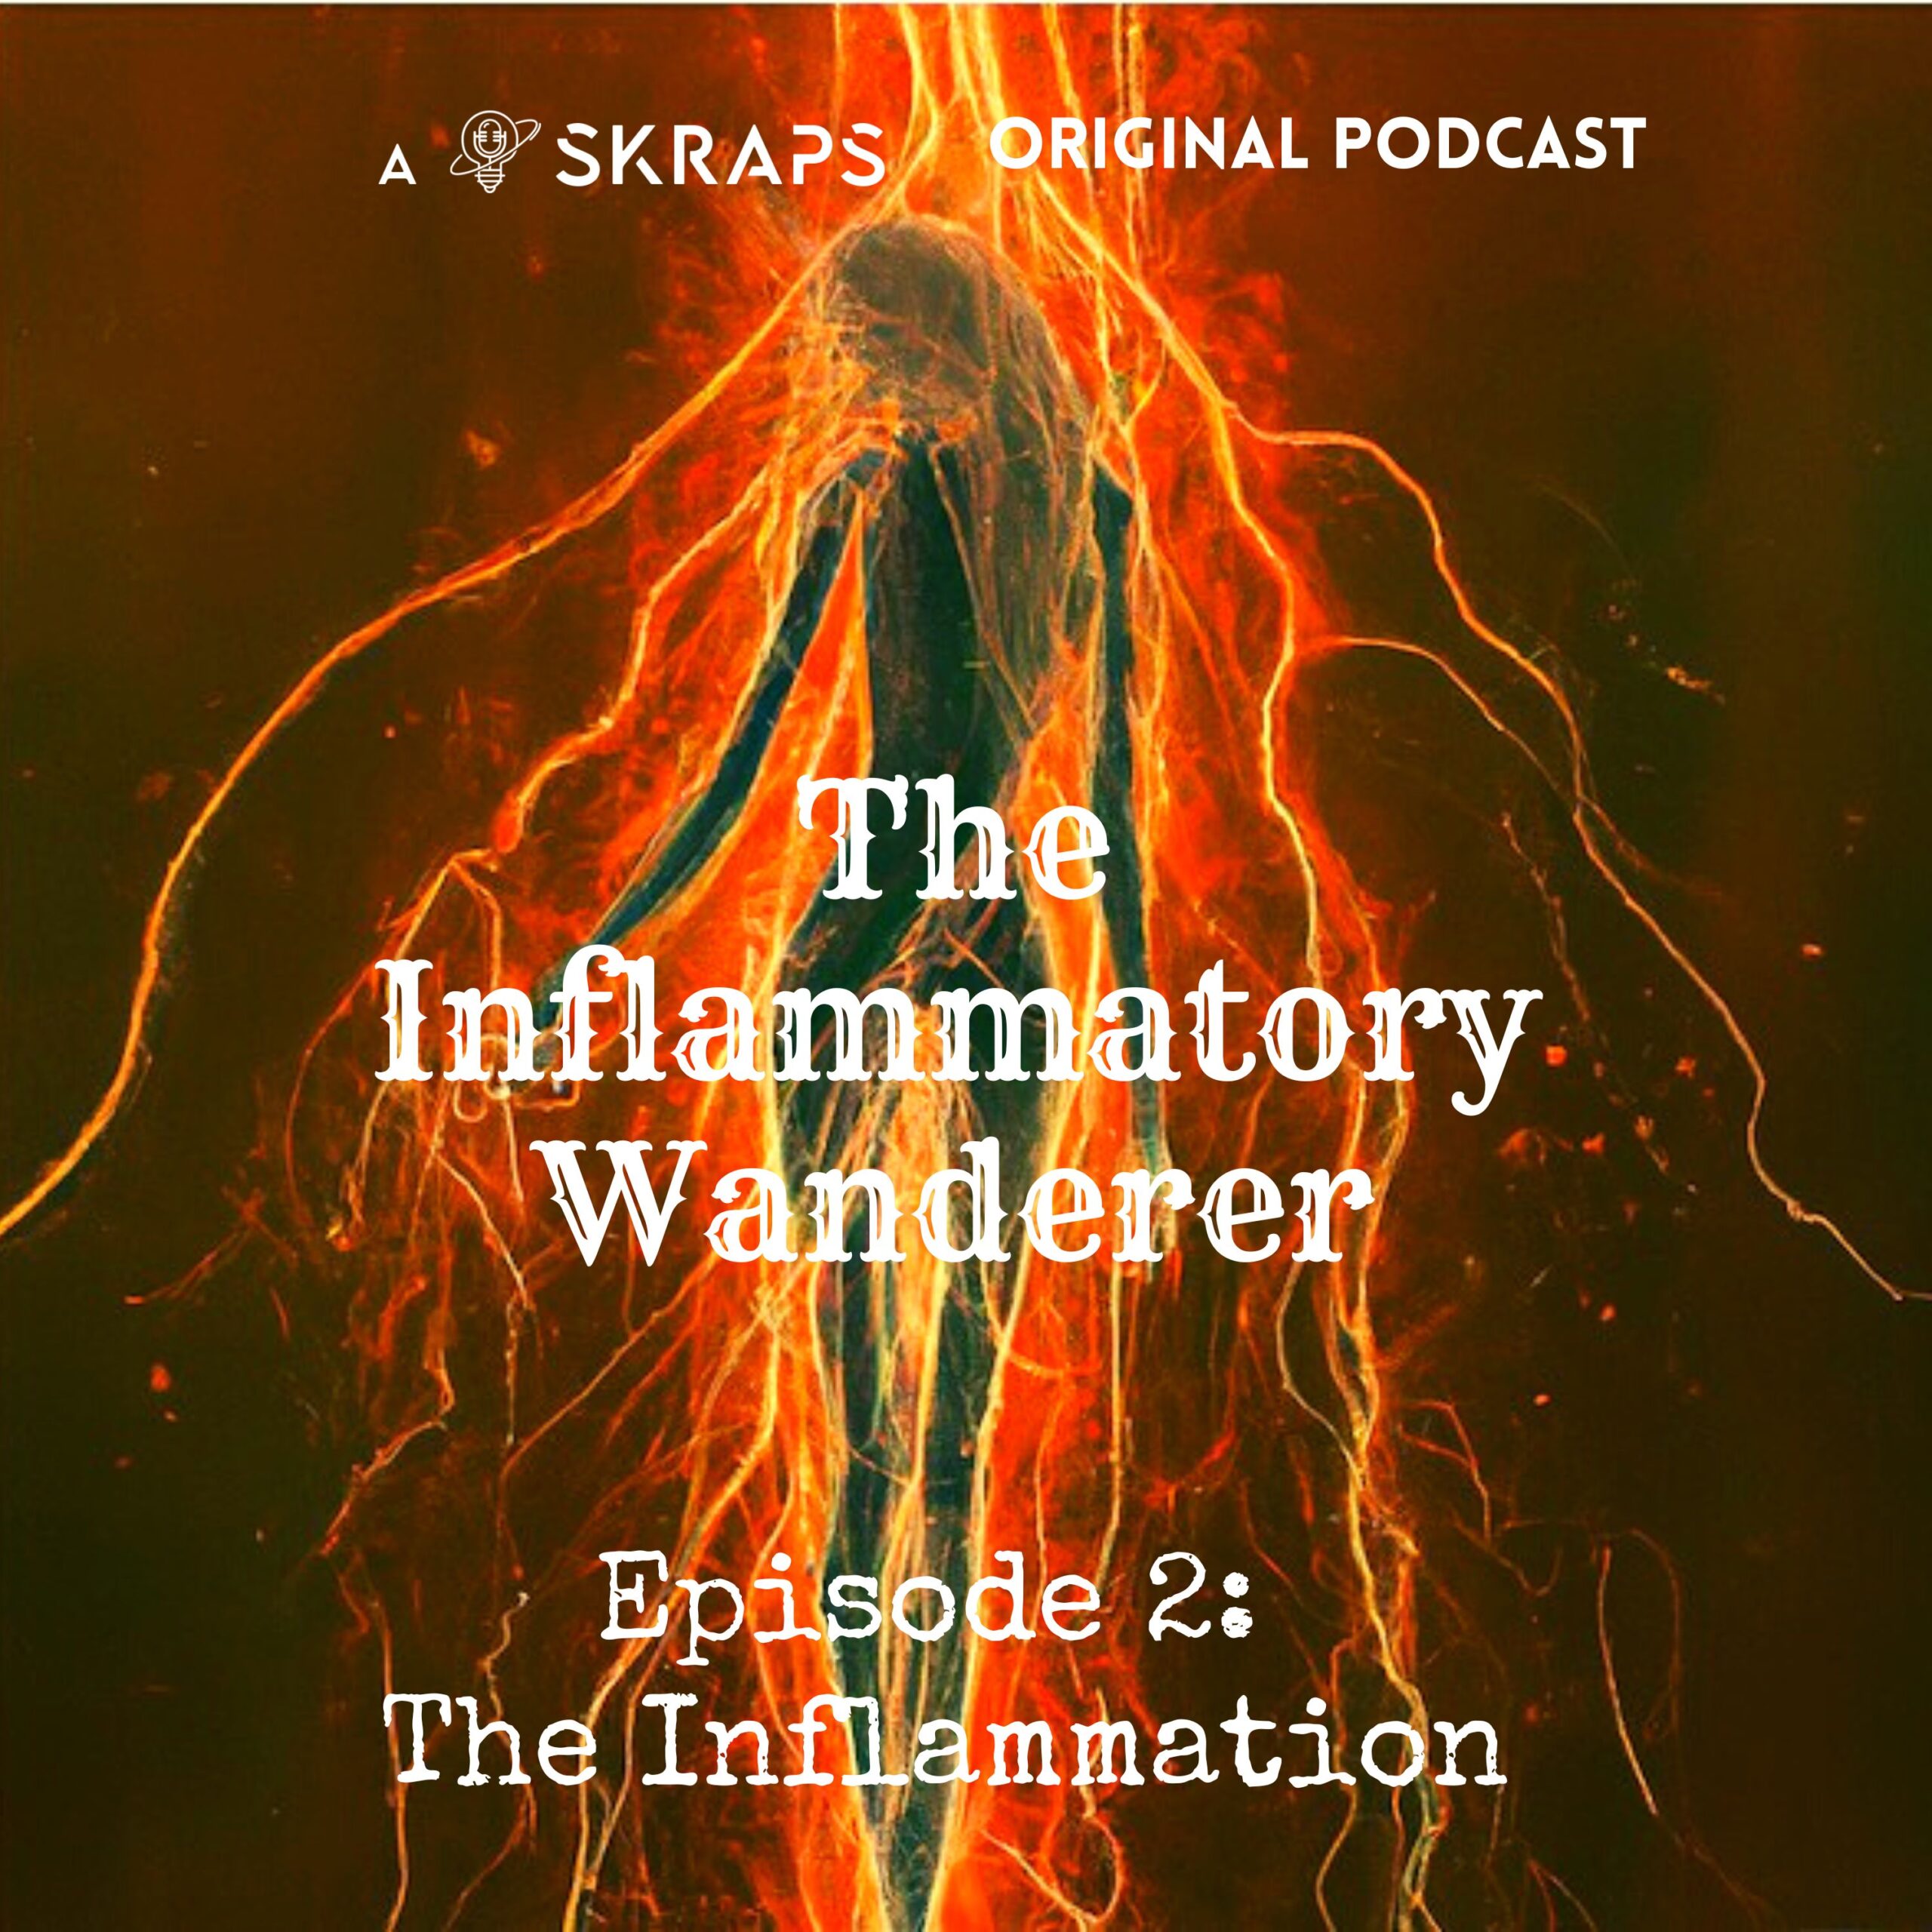 Episode 2: The Inflammation